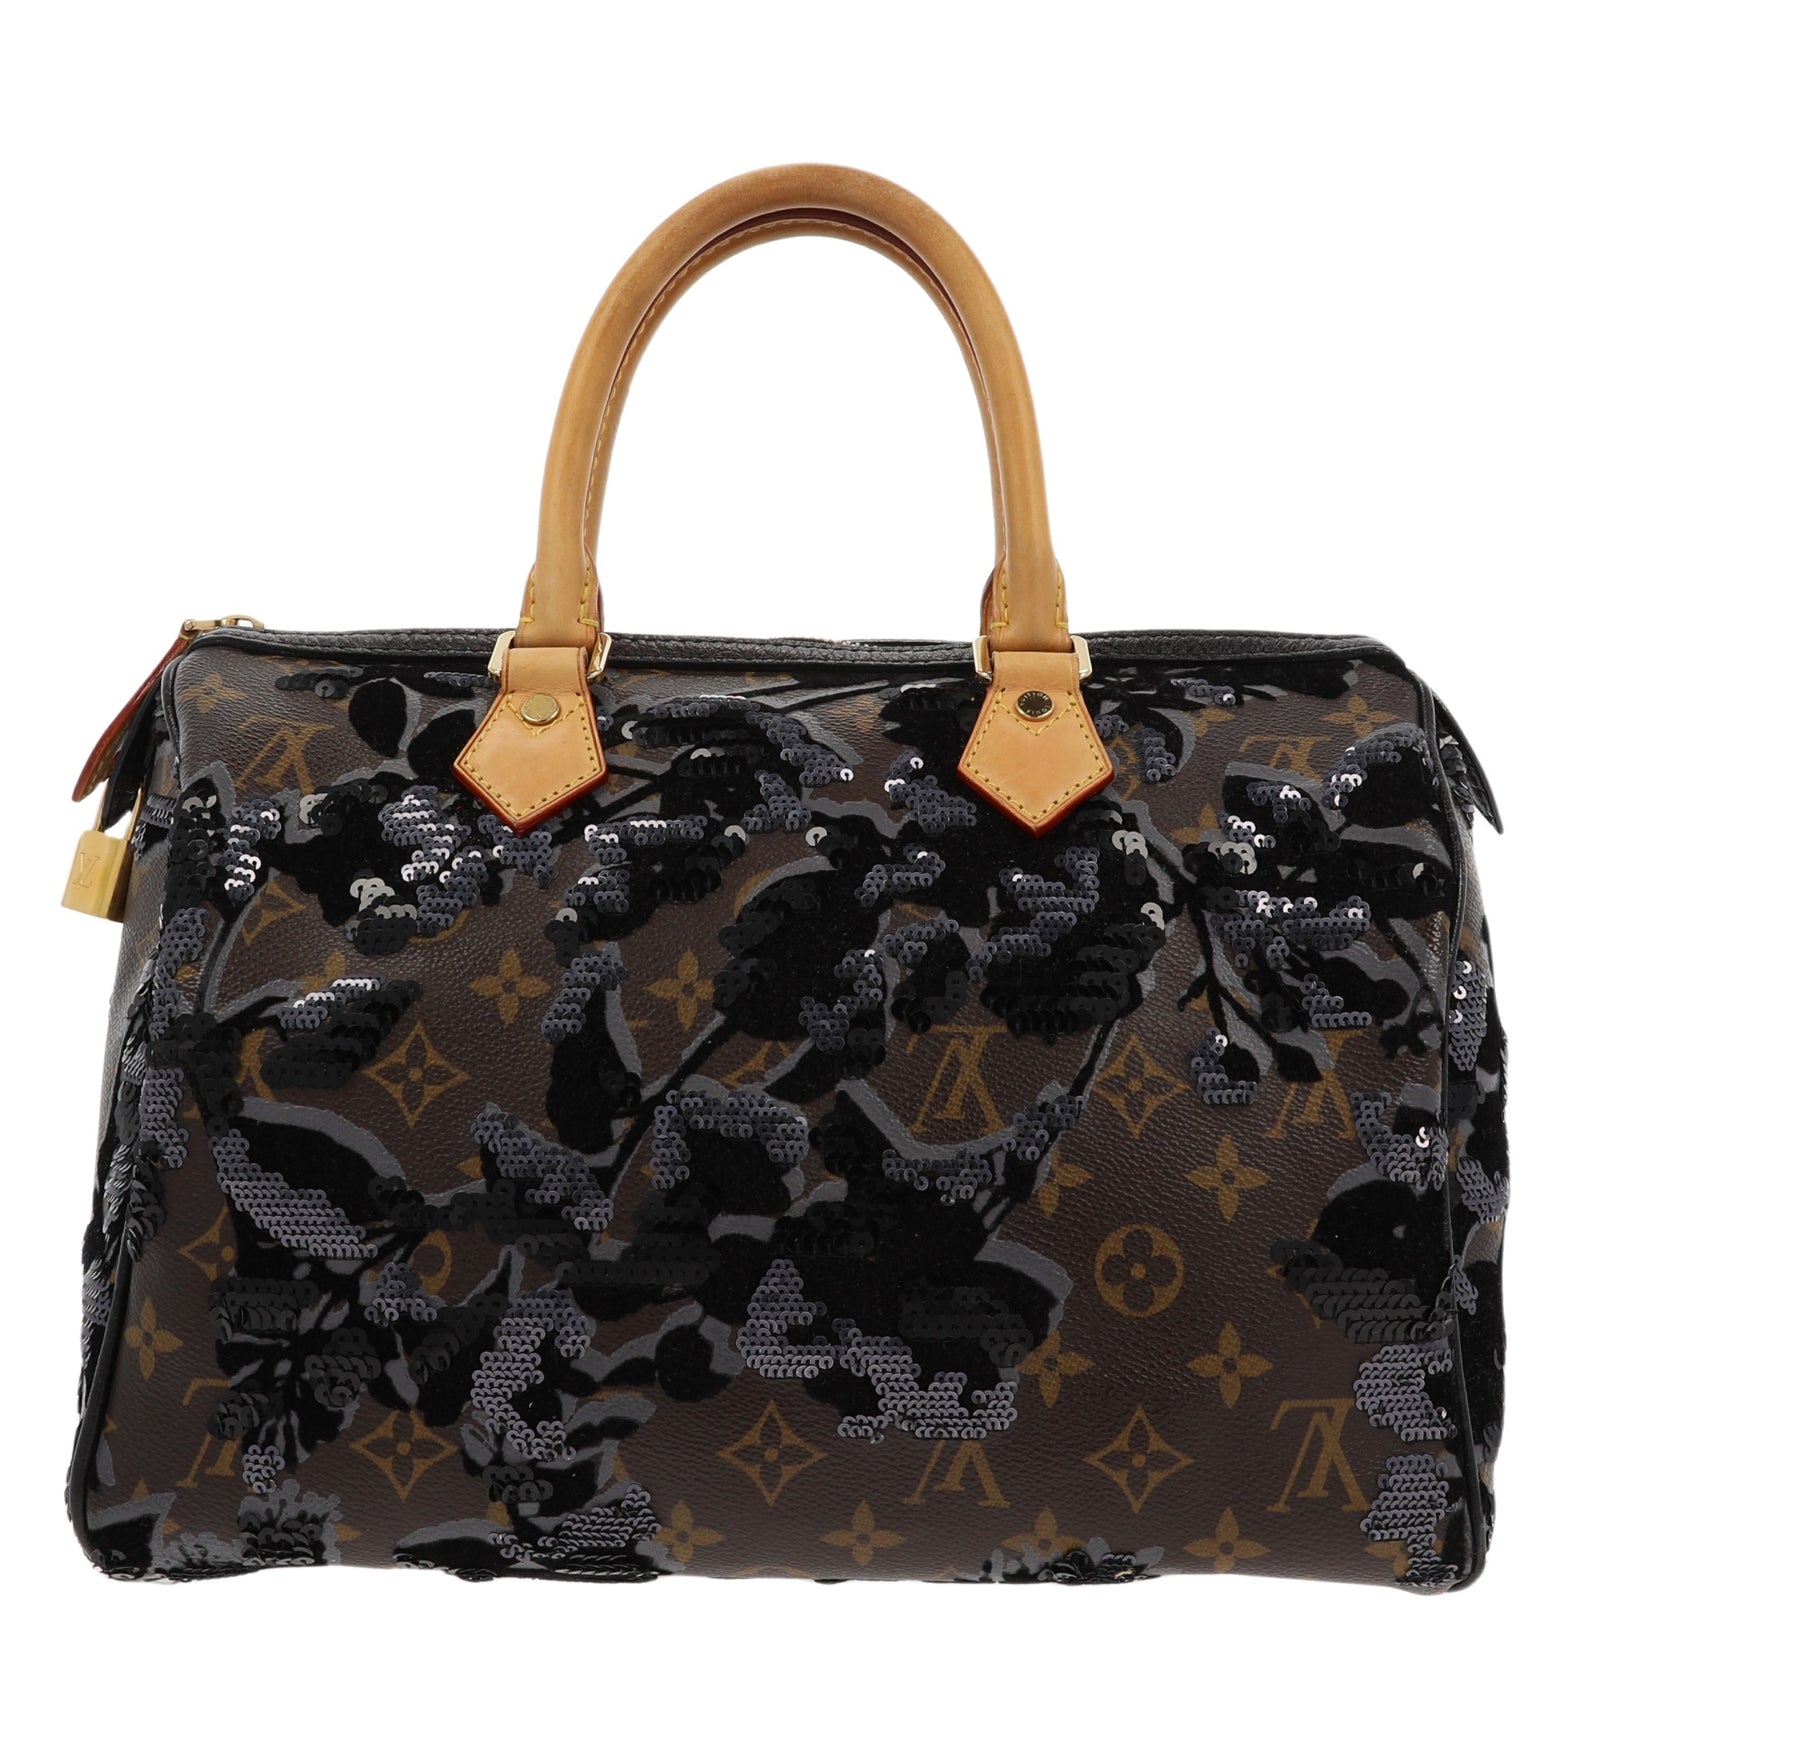 Louis Vuitton 2010 Pre-owned Limited Edition Speedy 30 Bag - Black